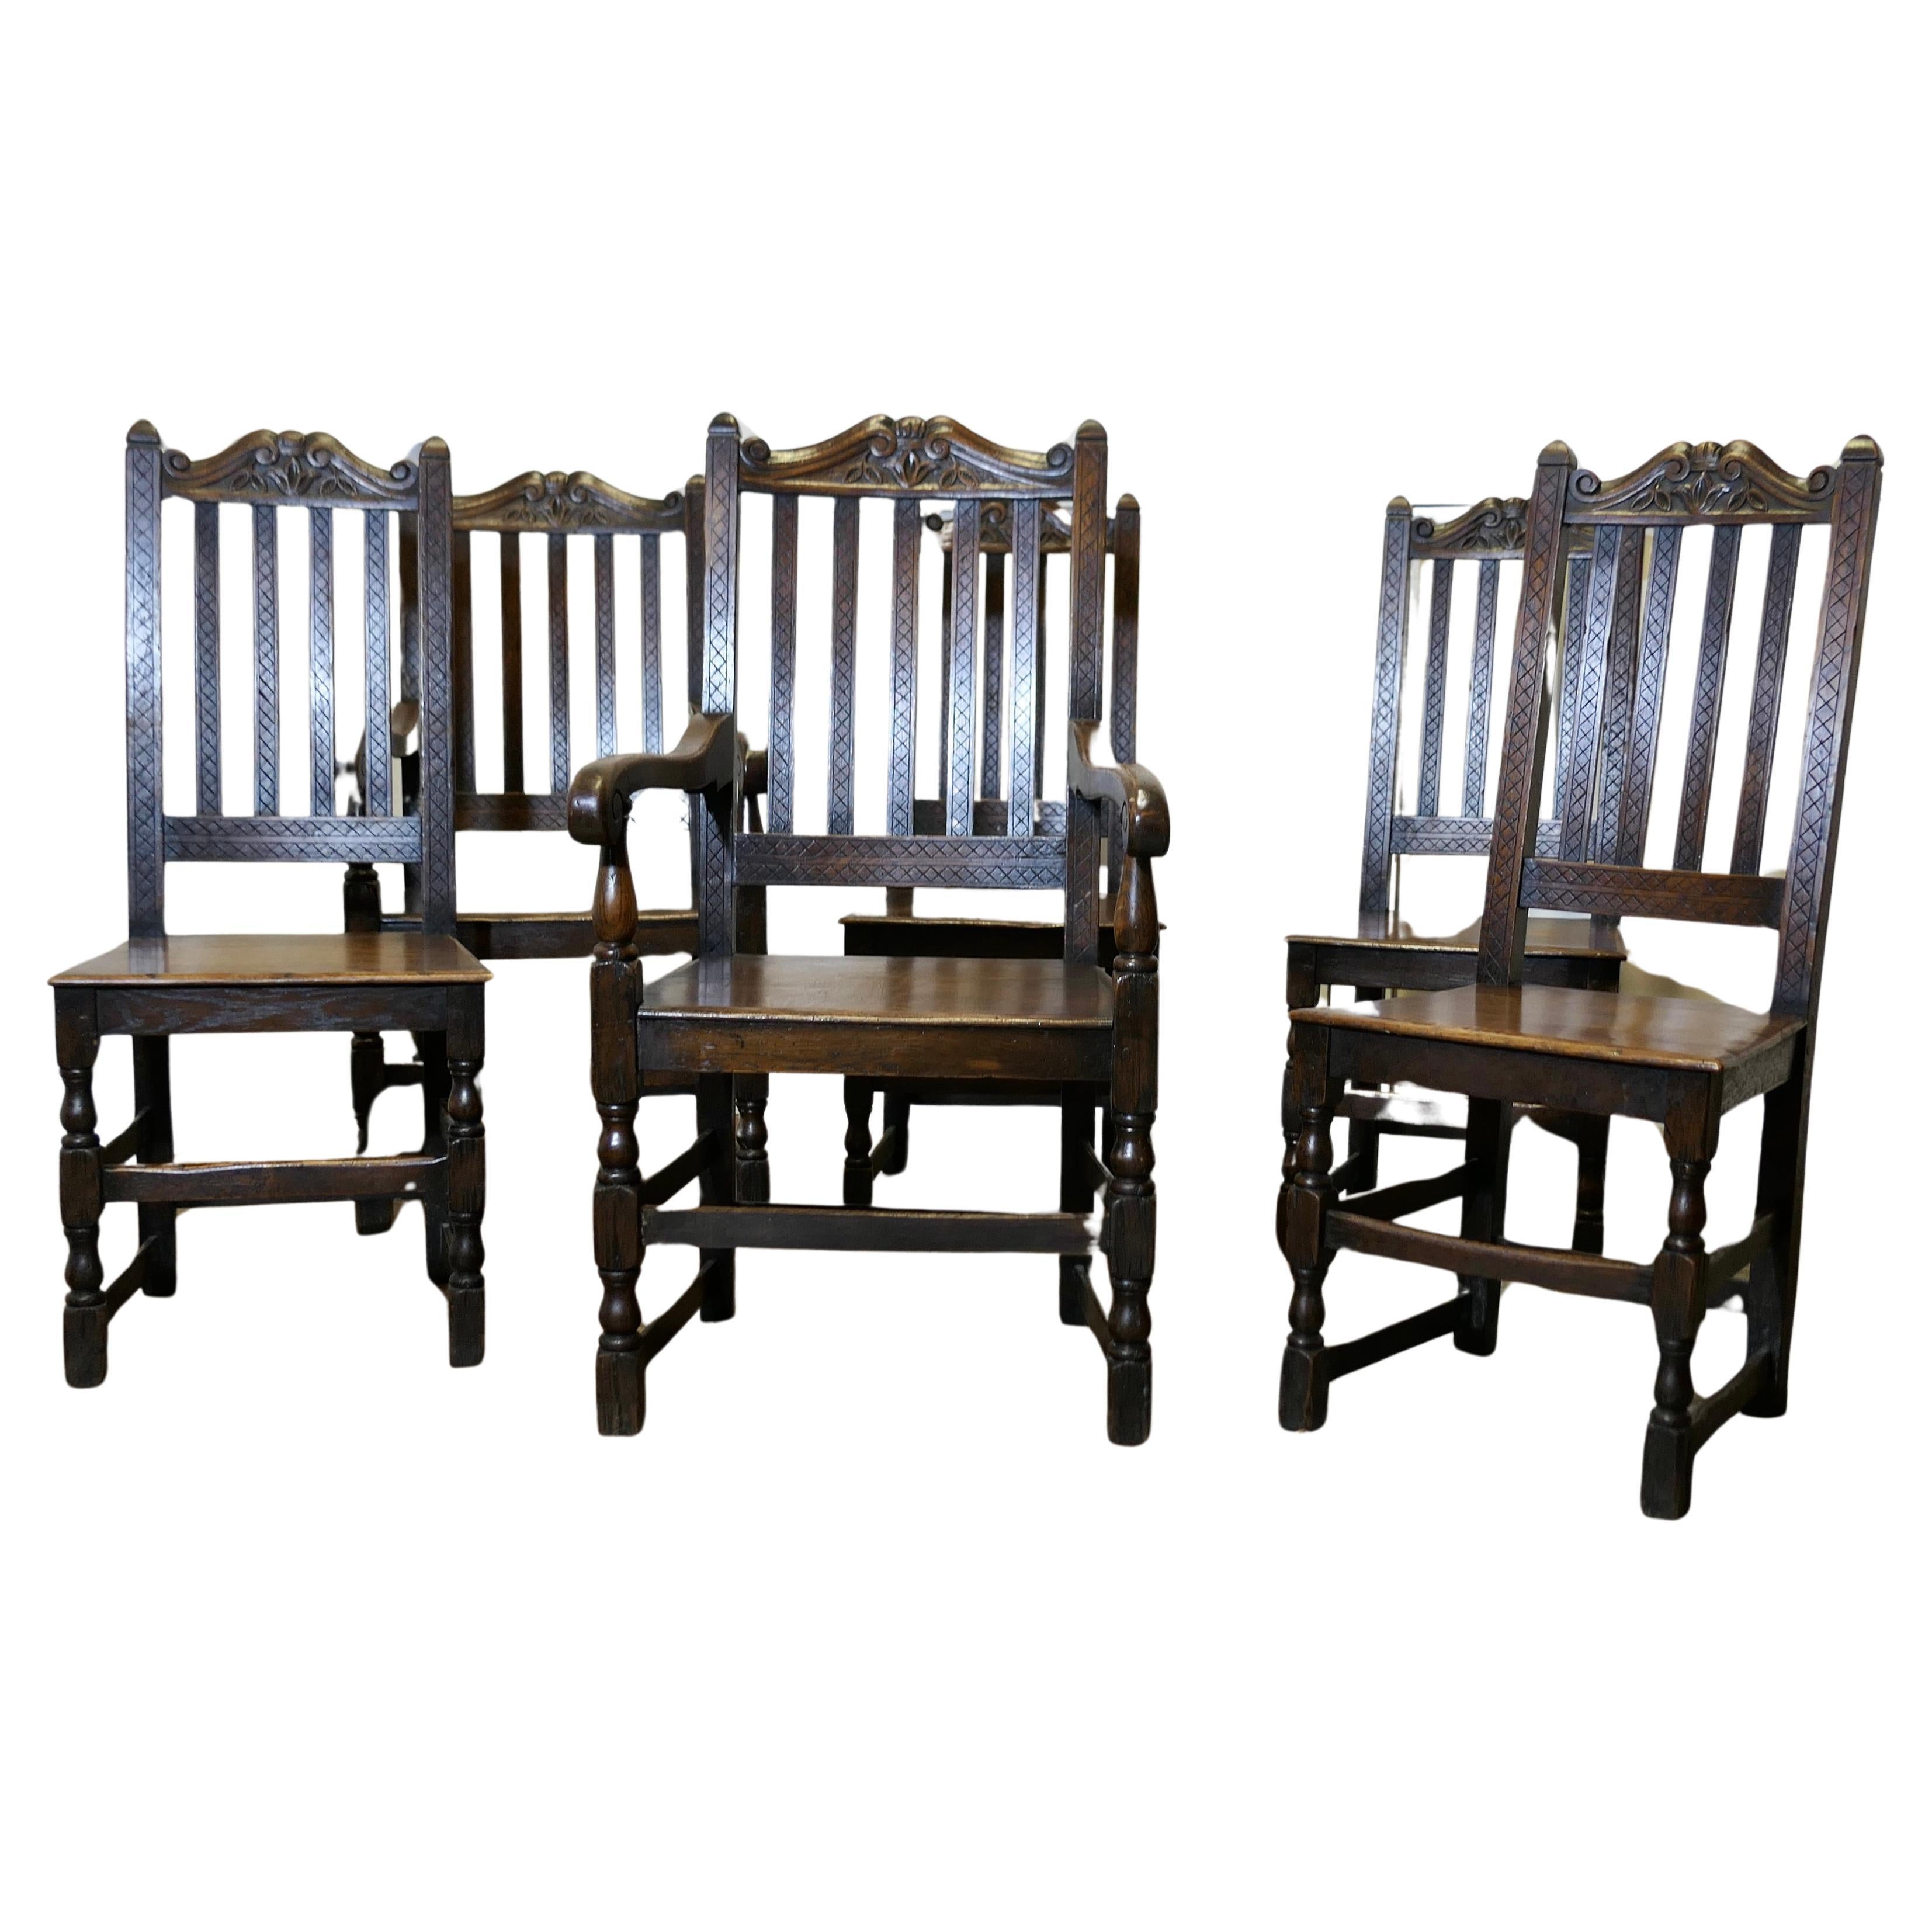 Set of 6 19th Century Country dining Chairs   This is a charming set of   For Sale